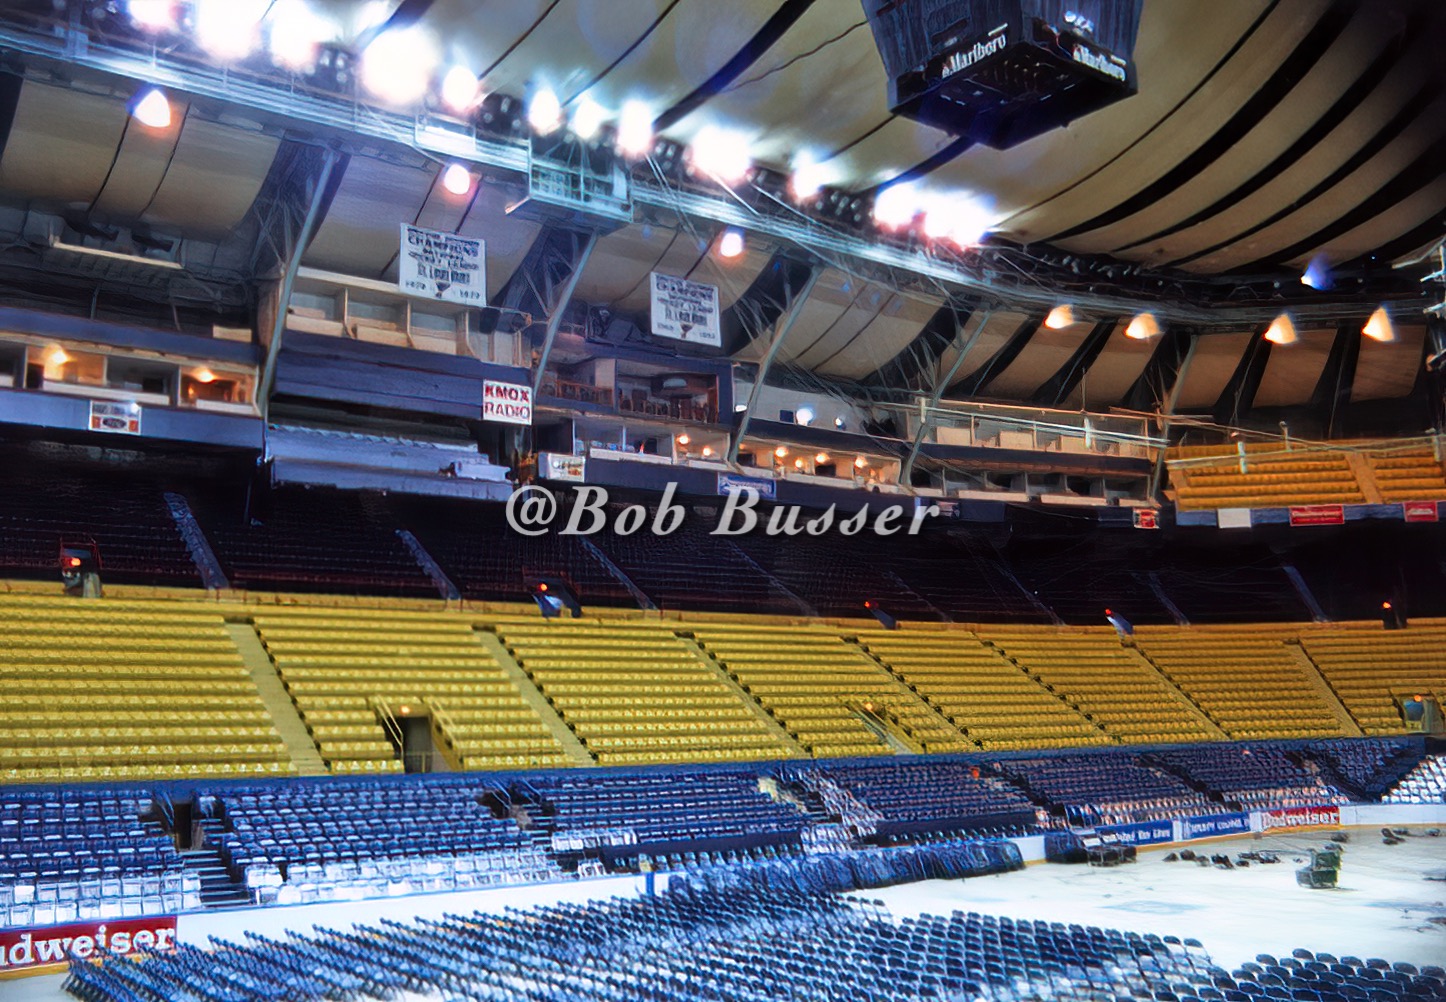 Bob Busser a X: The long gone St. Louis Arena. Blues, ABA Spirits and NBA  Hawks all played here (Hawks part time). MORE here   @NBA @Hoophall @NBATV @ESPNNBA @ATLHawks @StLouisBlues @NHL @